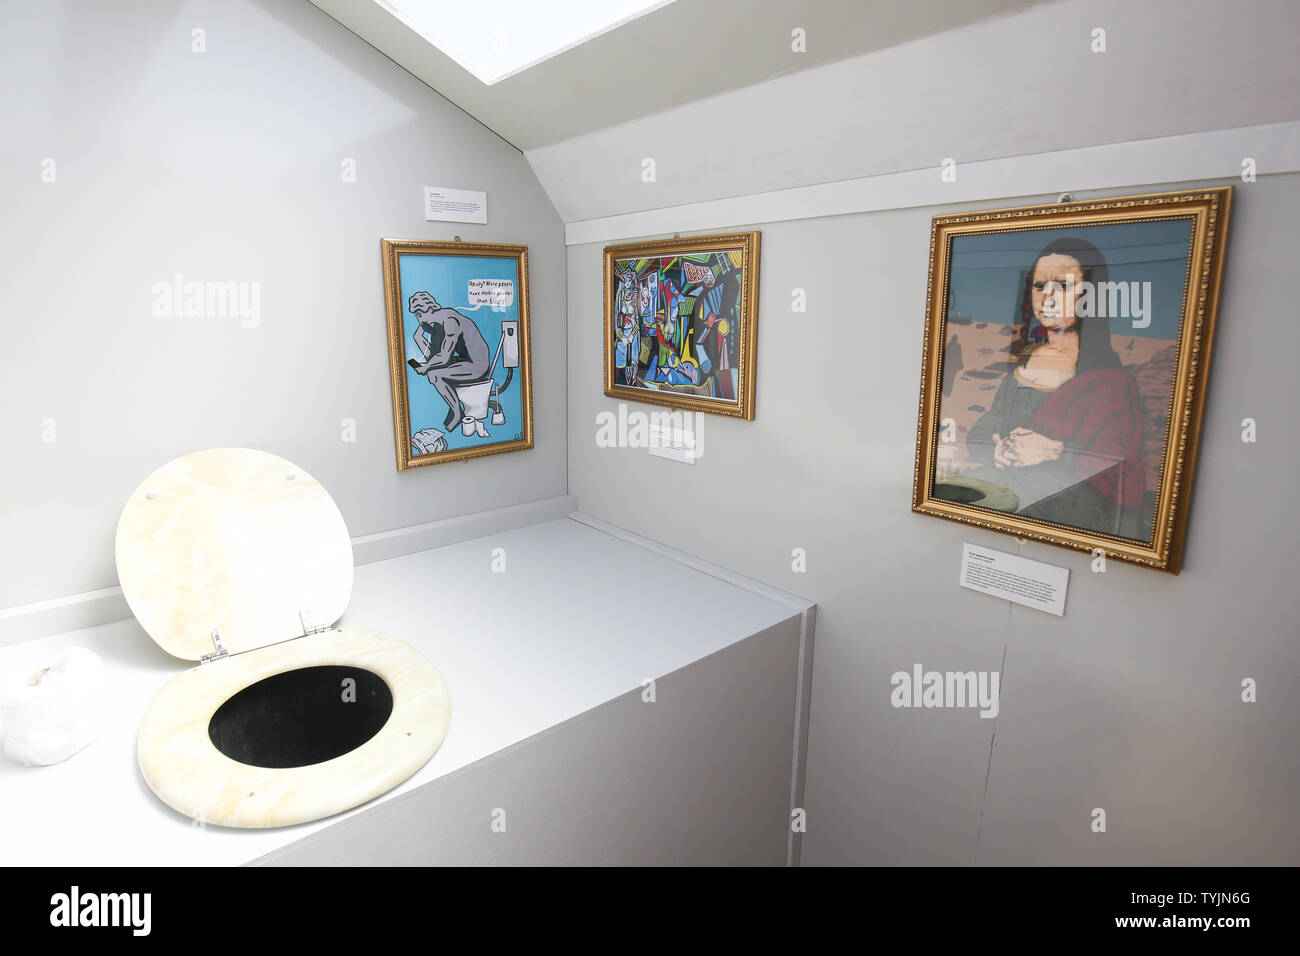 The Loovre toilet created by Water Aid at Glastonbury Festival, at Worthy Farm in Somerset. The art gallery is in a toilet cubicle displaying famous works with a twist. Stock Photo